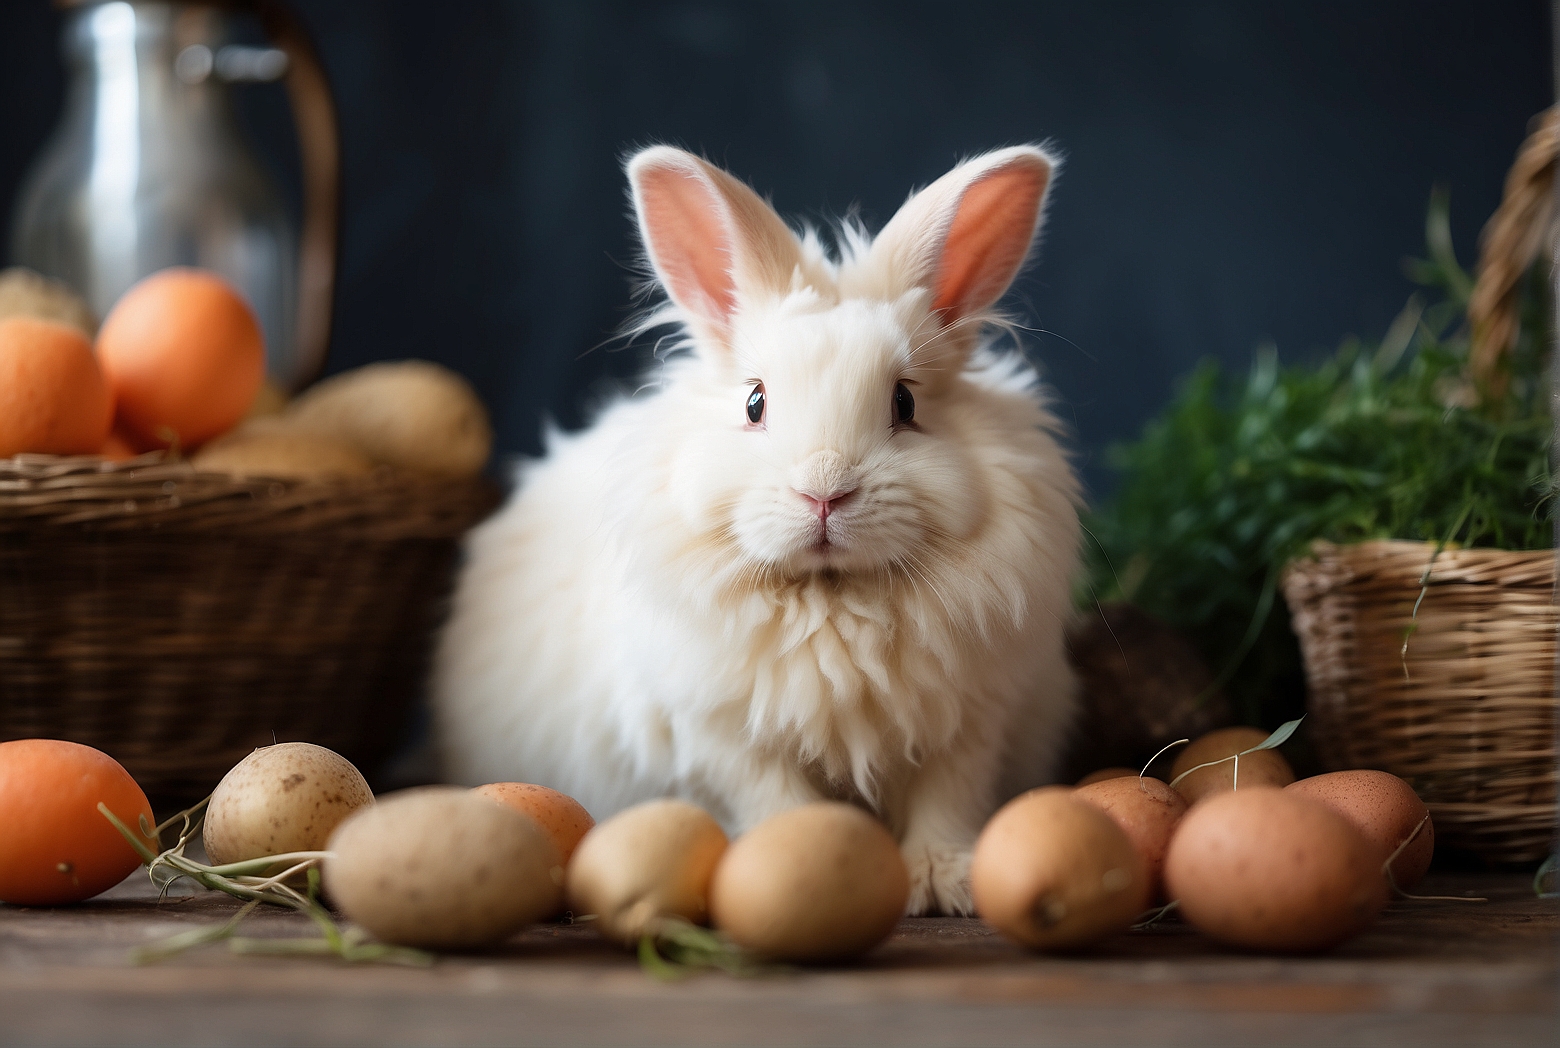 What Are the Best Foods for English Angora Rabbits?